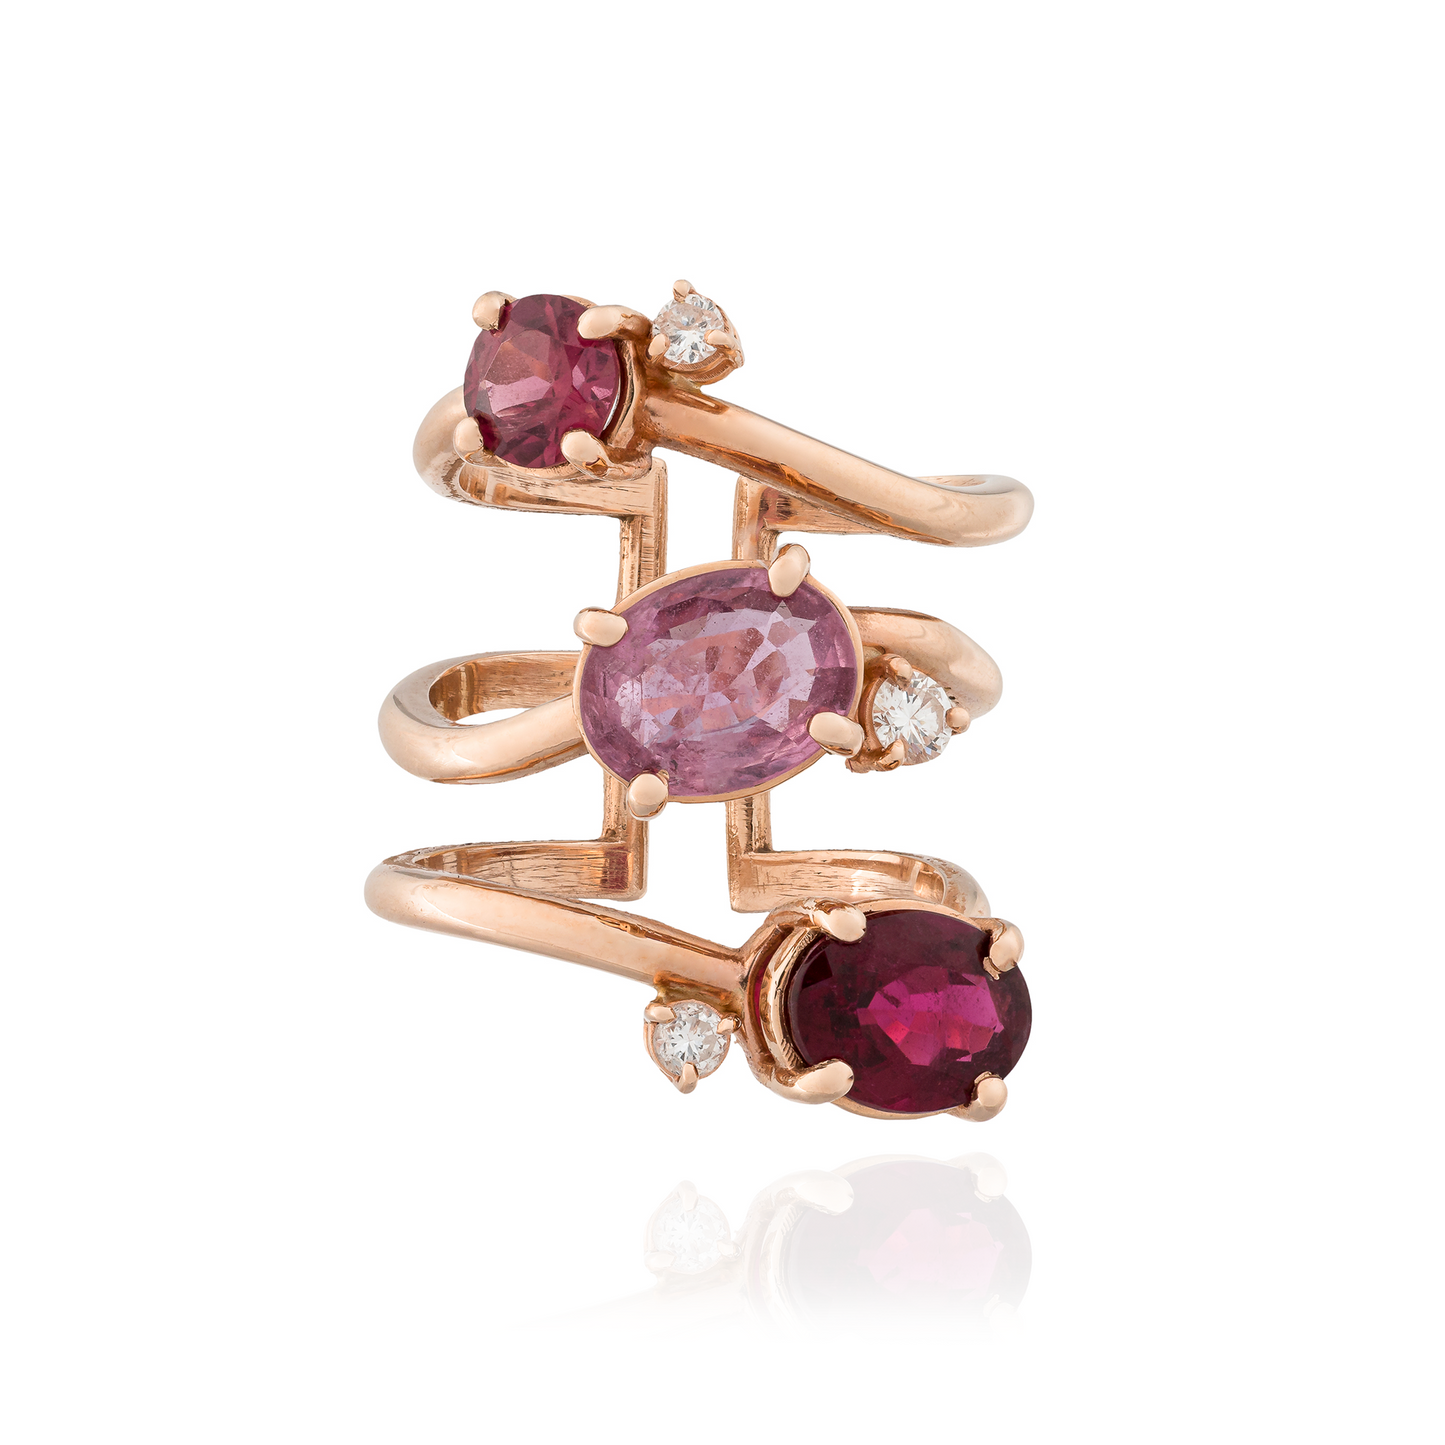 14KT Rose gold Ring with Rodolite, Rubellite, Pink Sapphire and Diamond